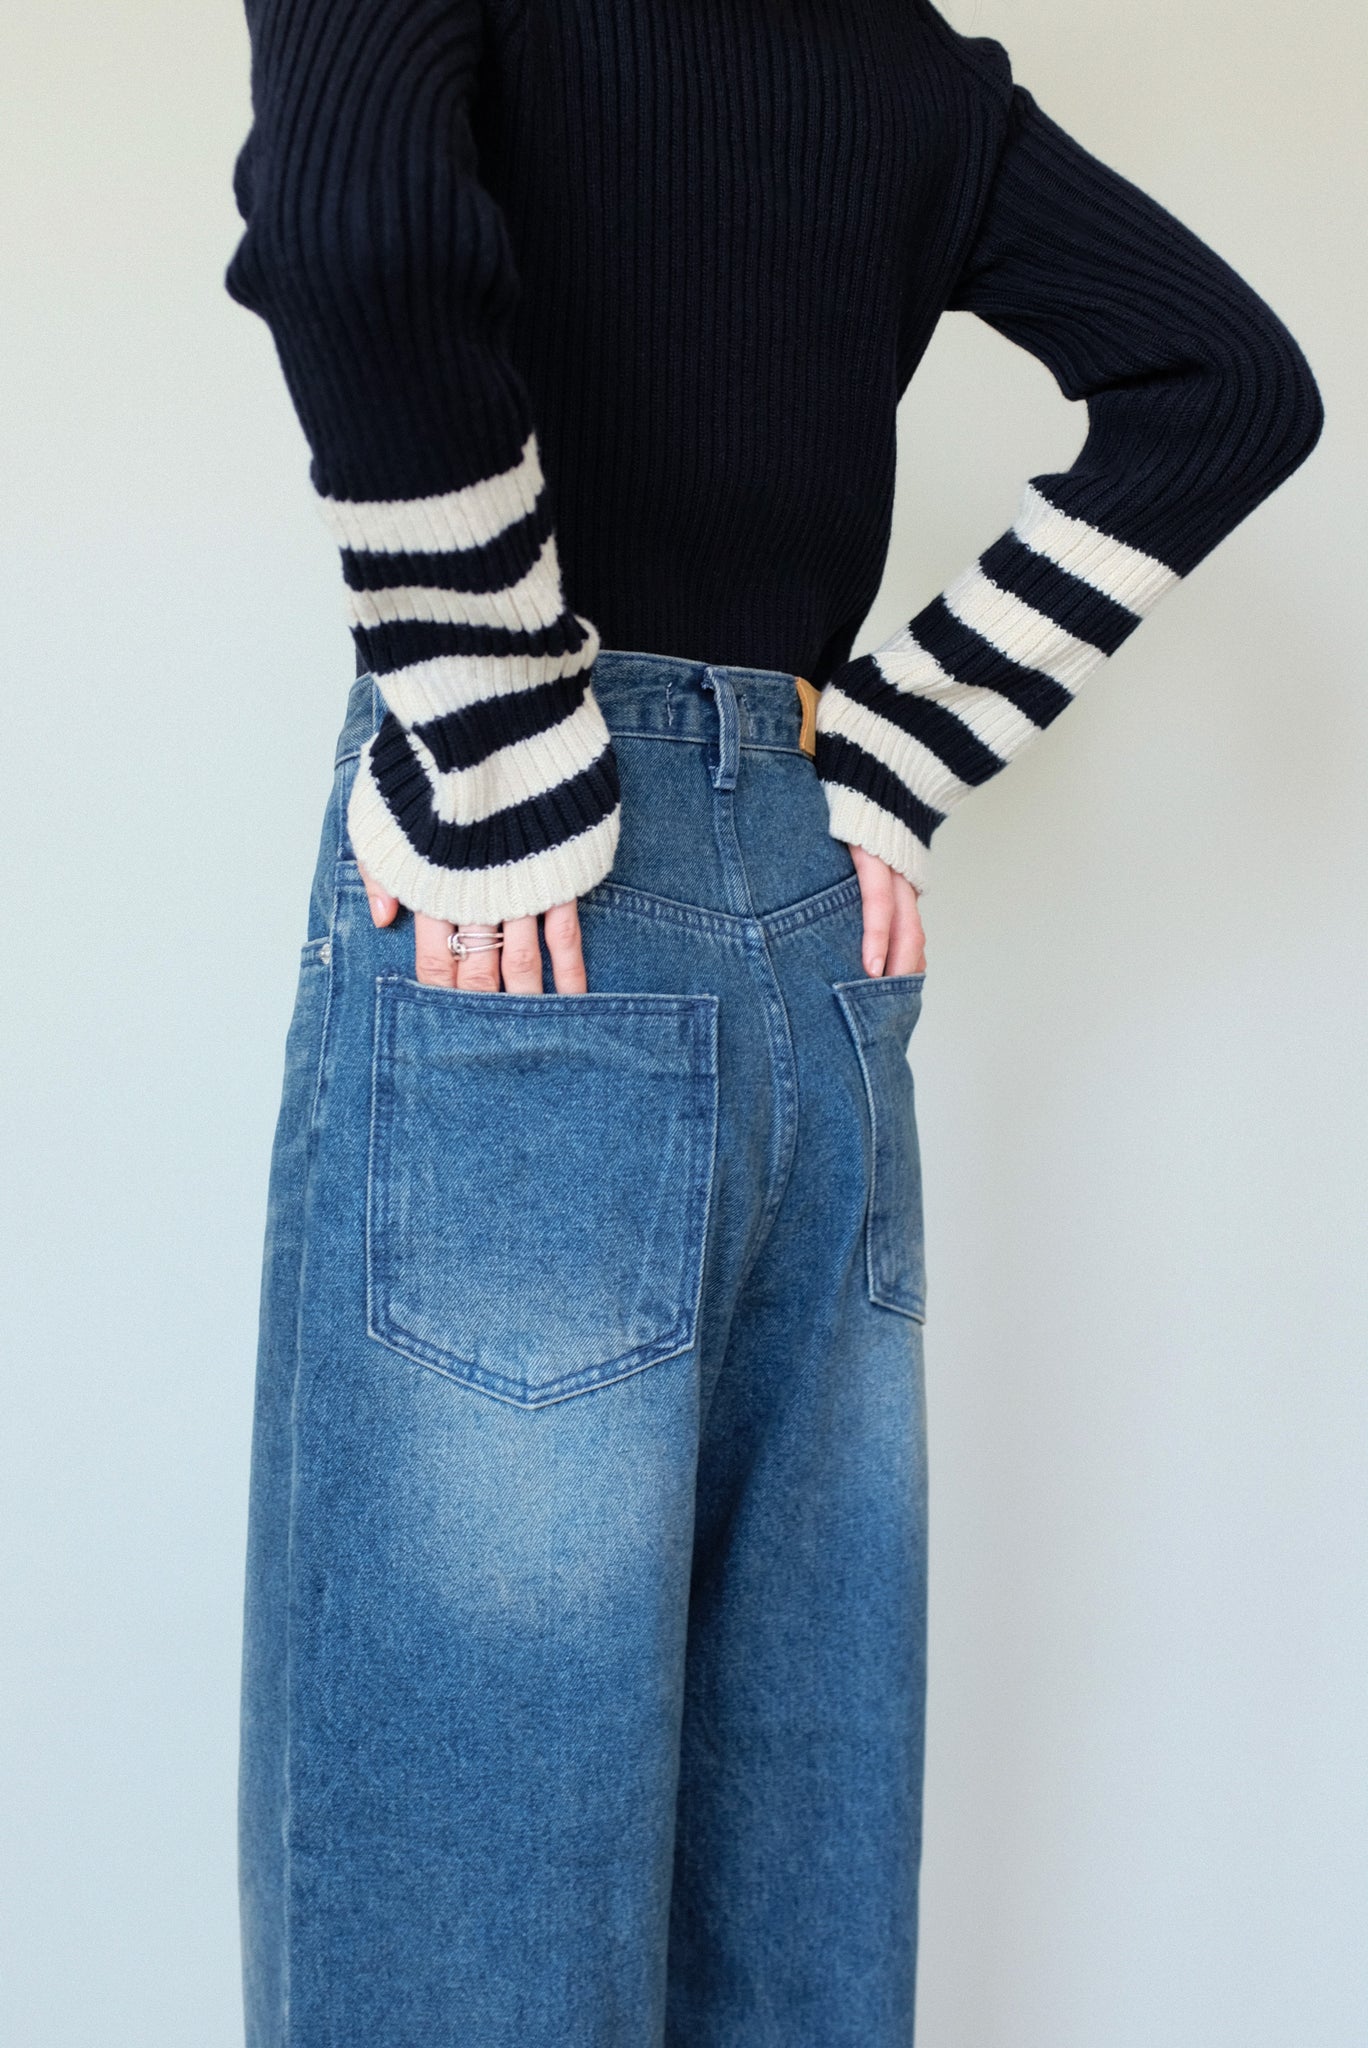 Striped Knit Top in Navy